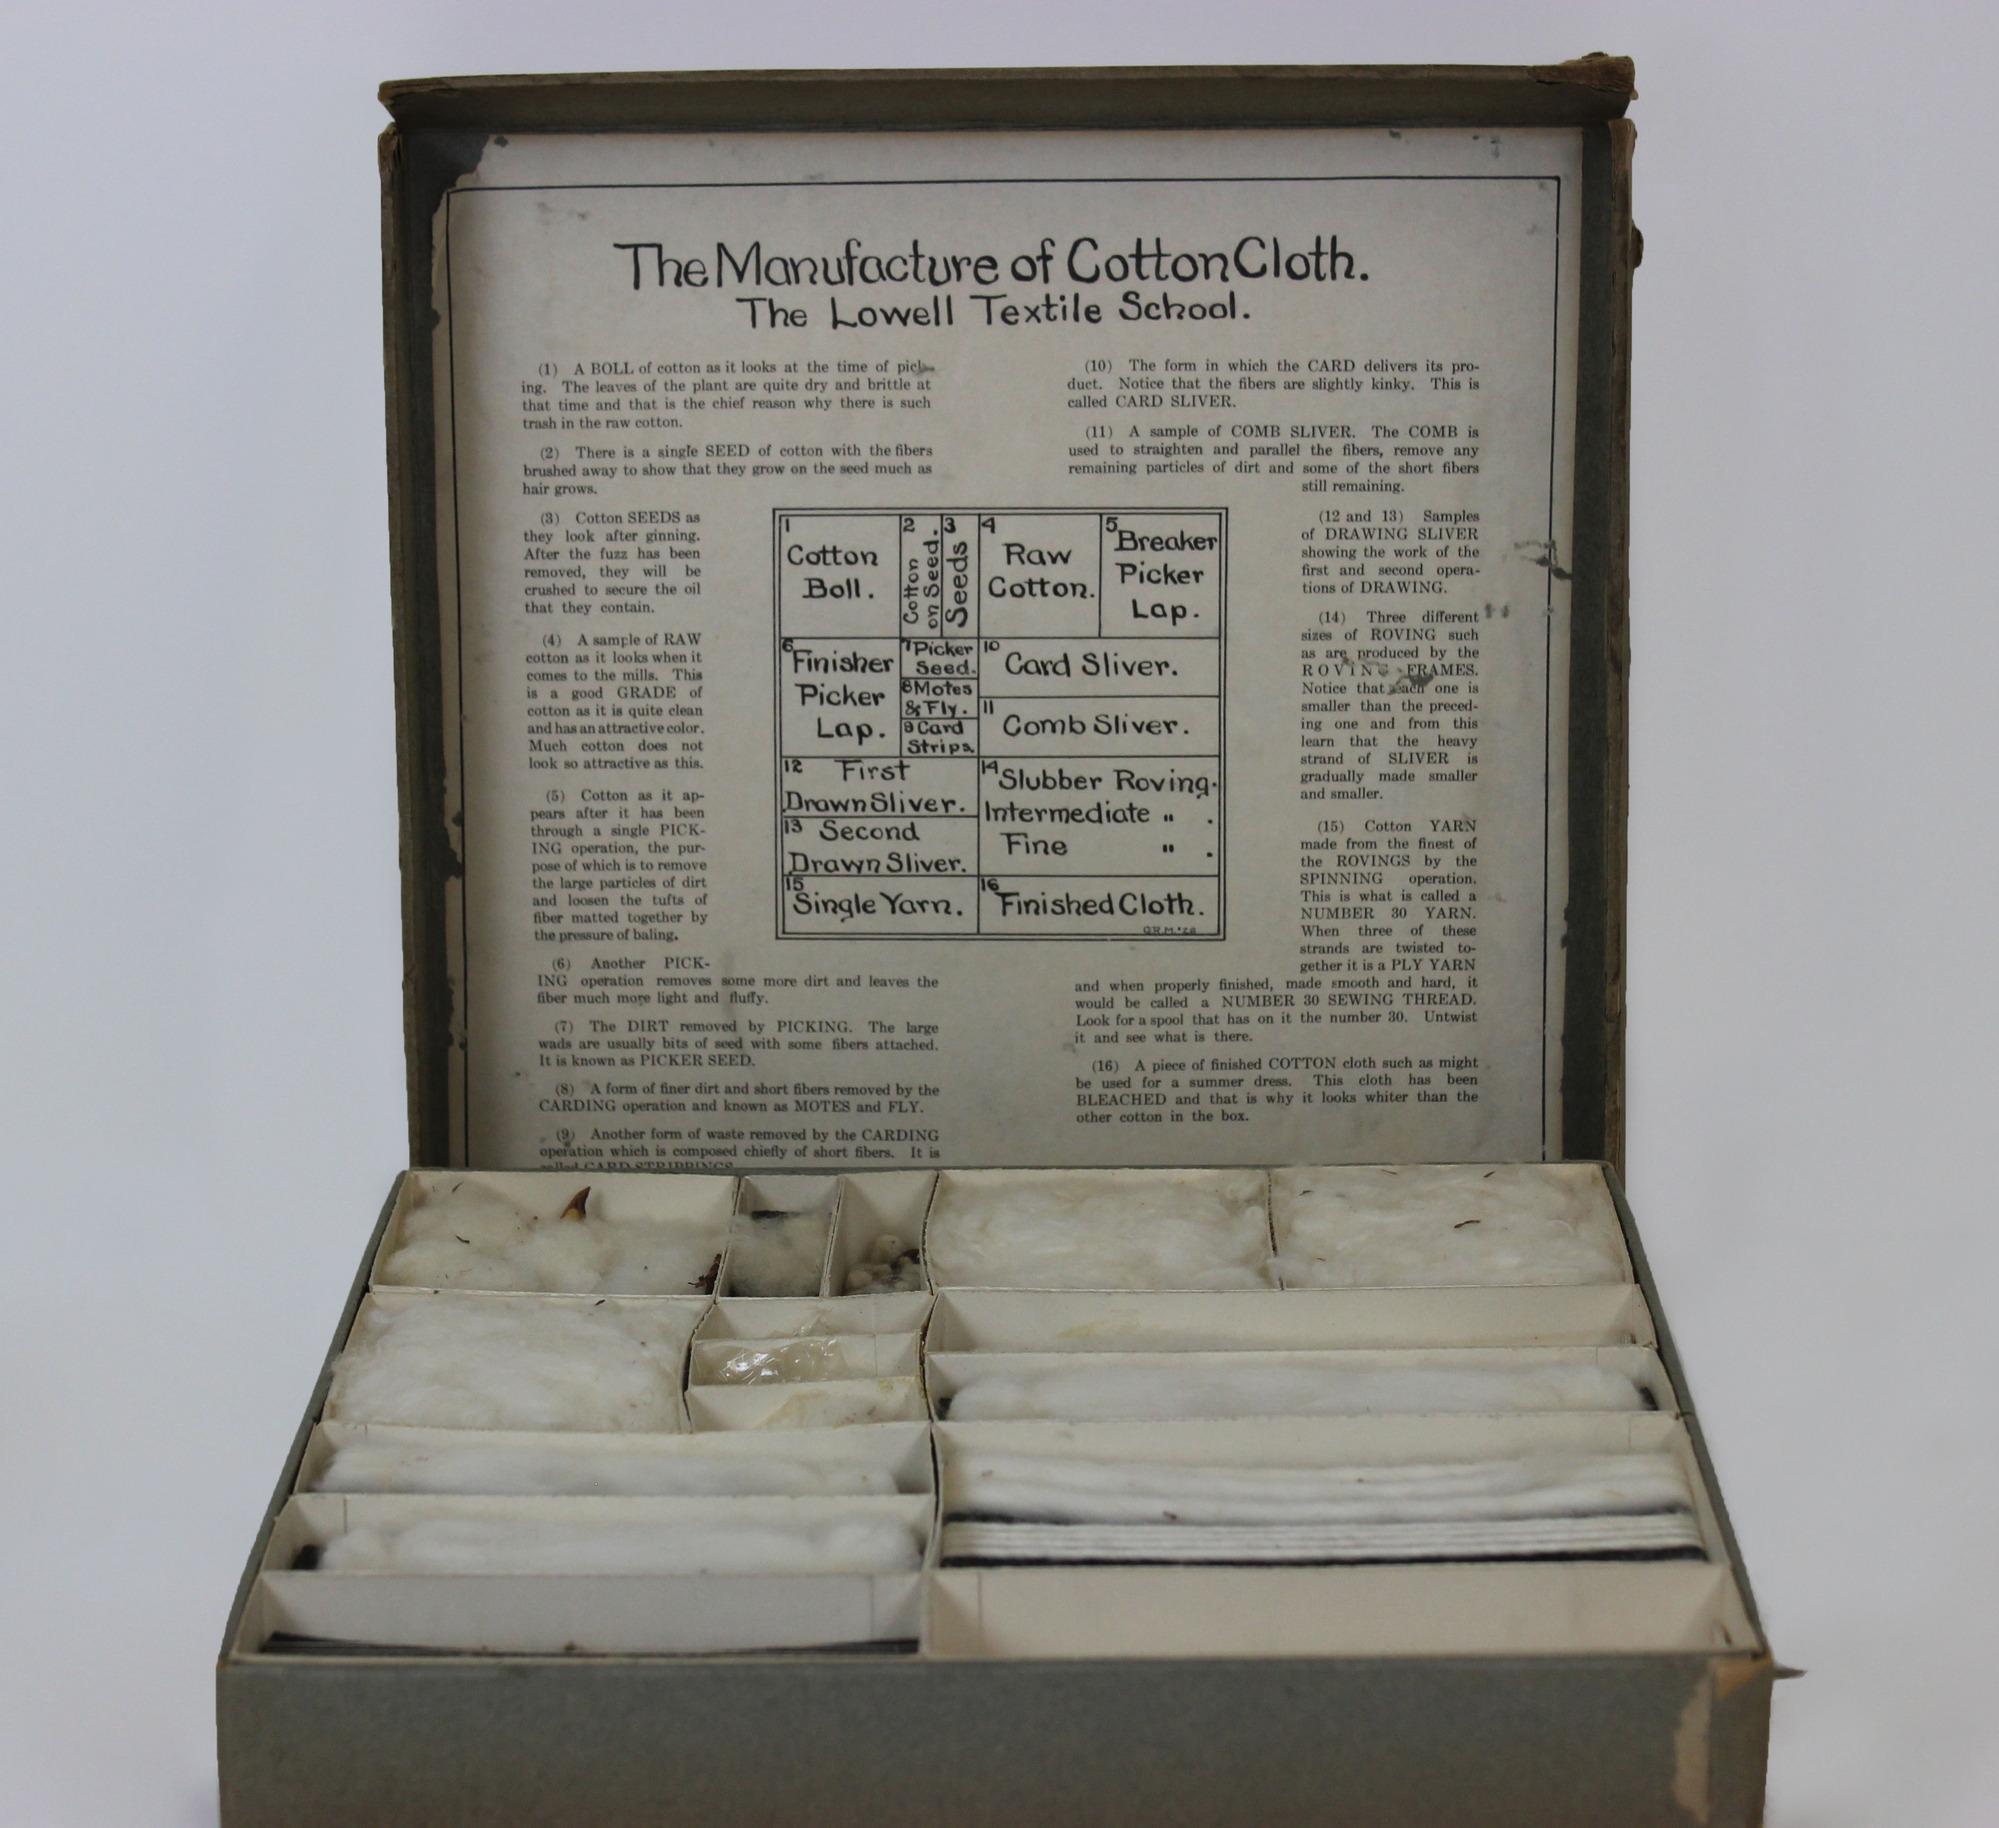 A box with sub-dividers containing different materials. The underneath of the lid is labeled 'The Manufacture of Cotton Cloth. The Lowell Textile School.'